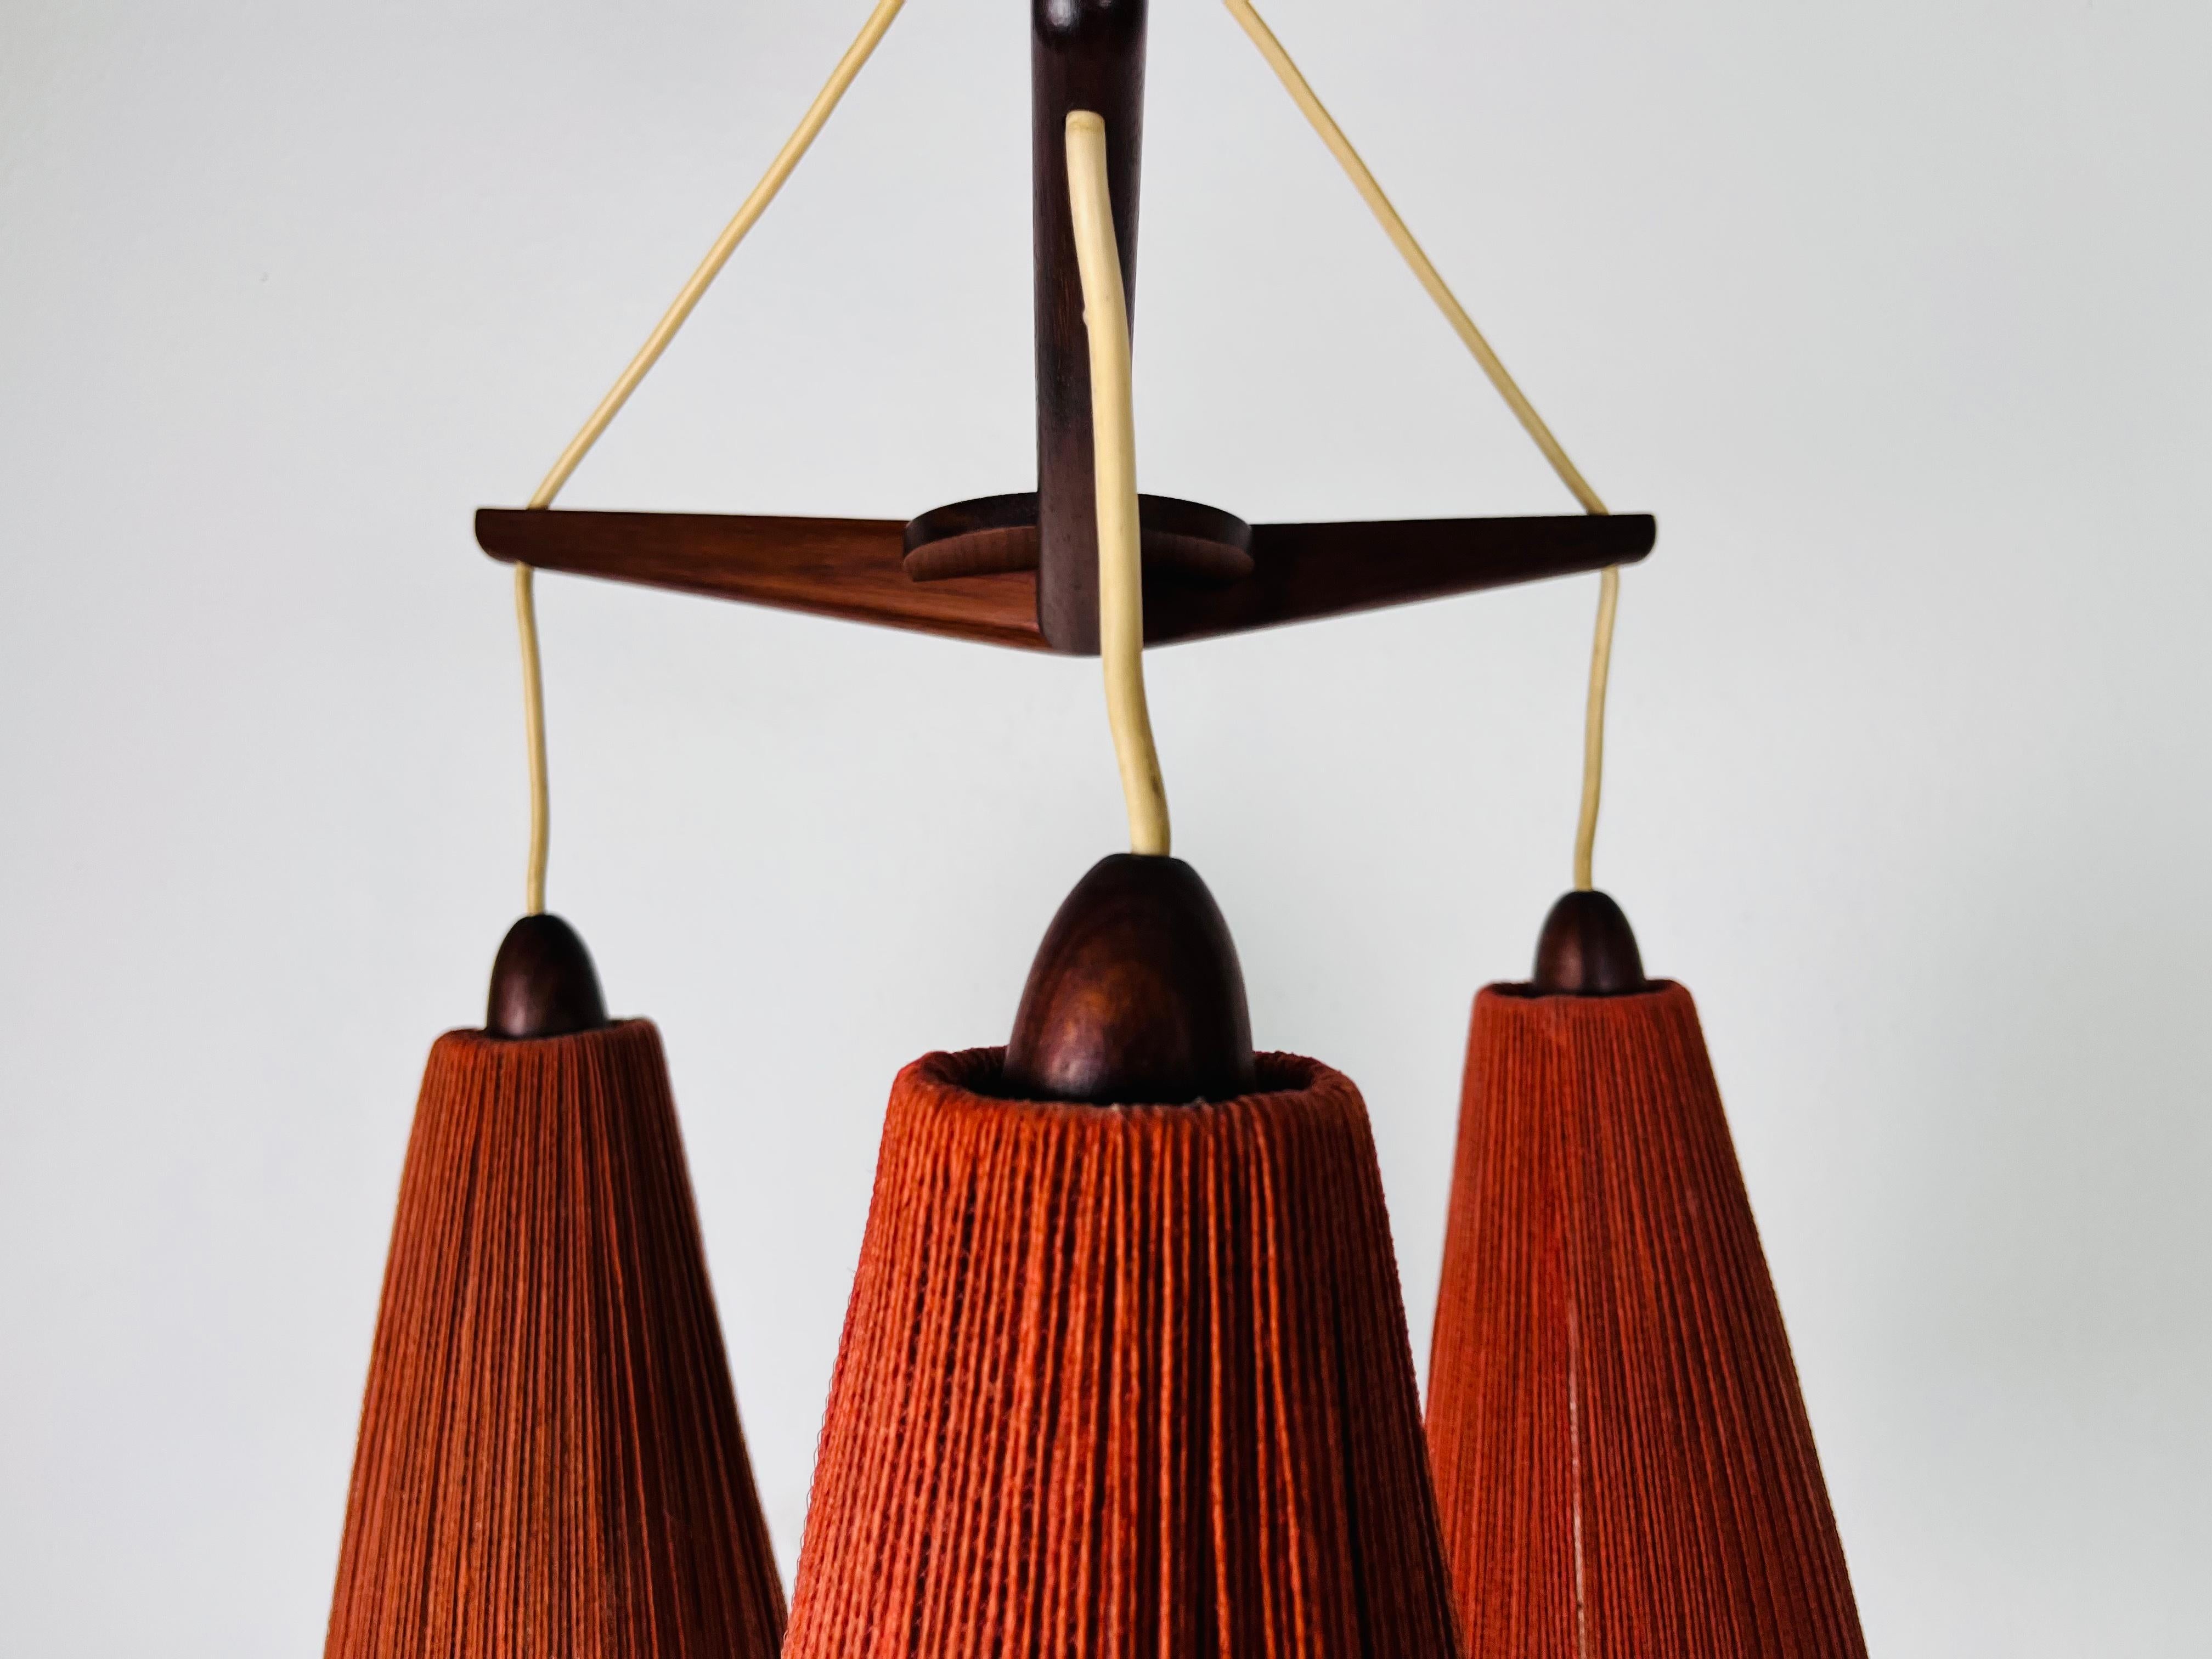 Midcentury Teak and Cord Shade Hanging Lamp by Temde, circa 1960 In Good Condition For Sale In Hagenbach, DE